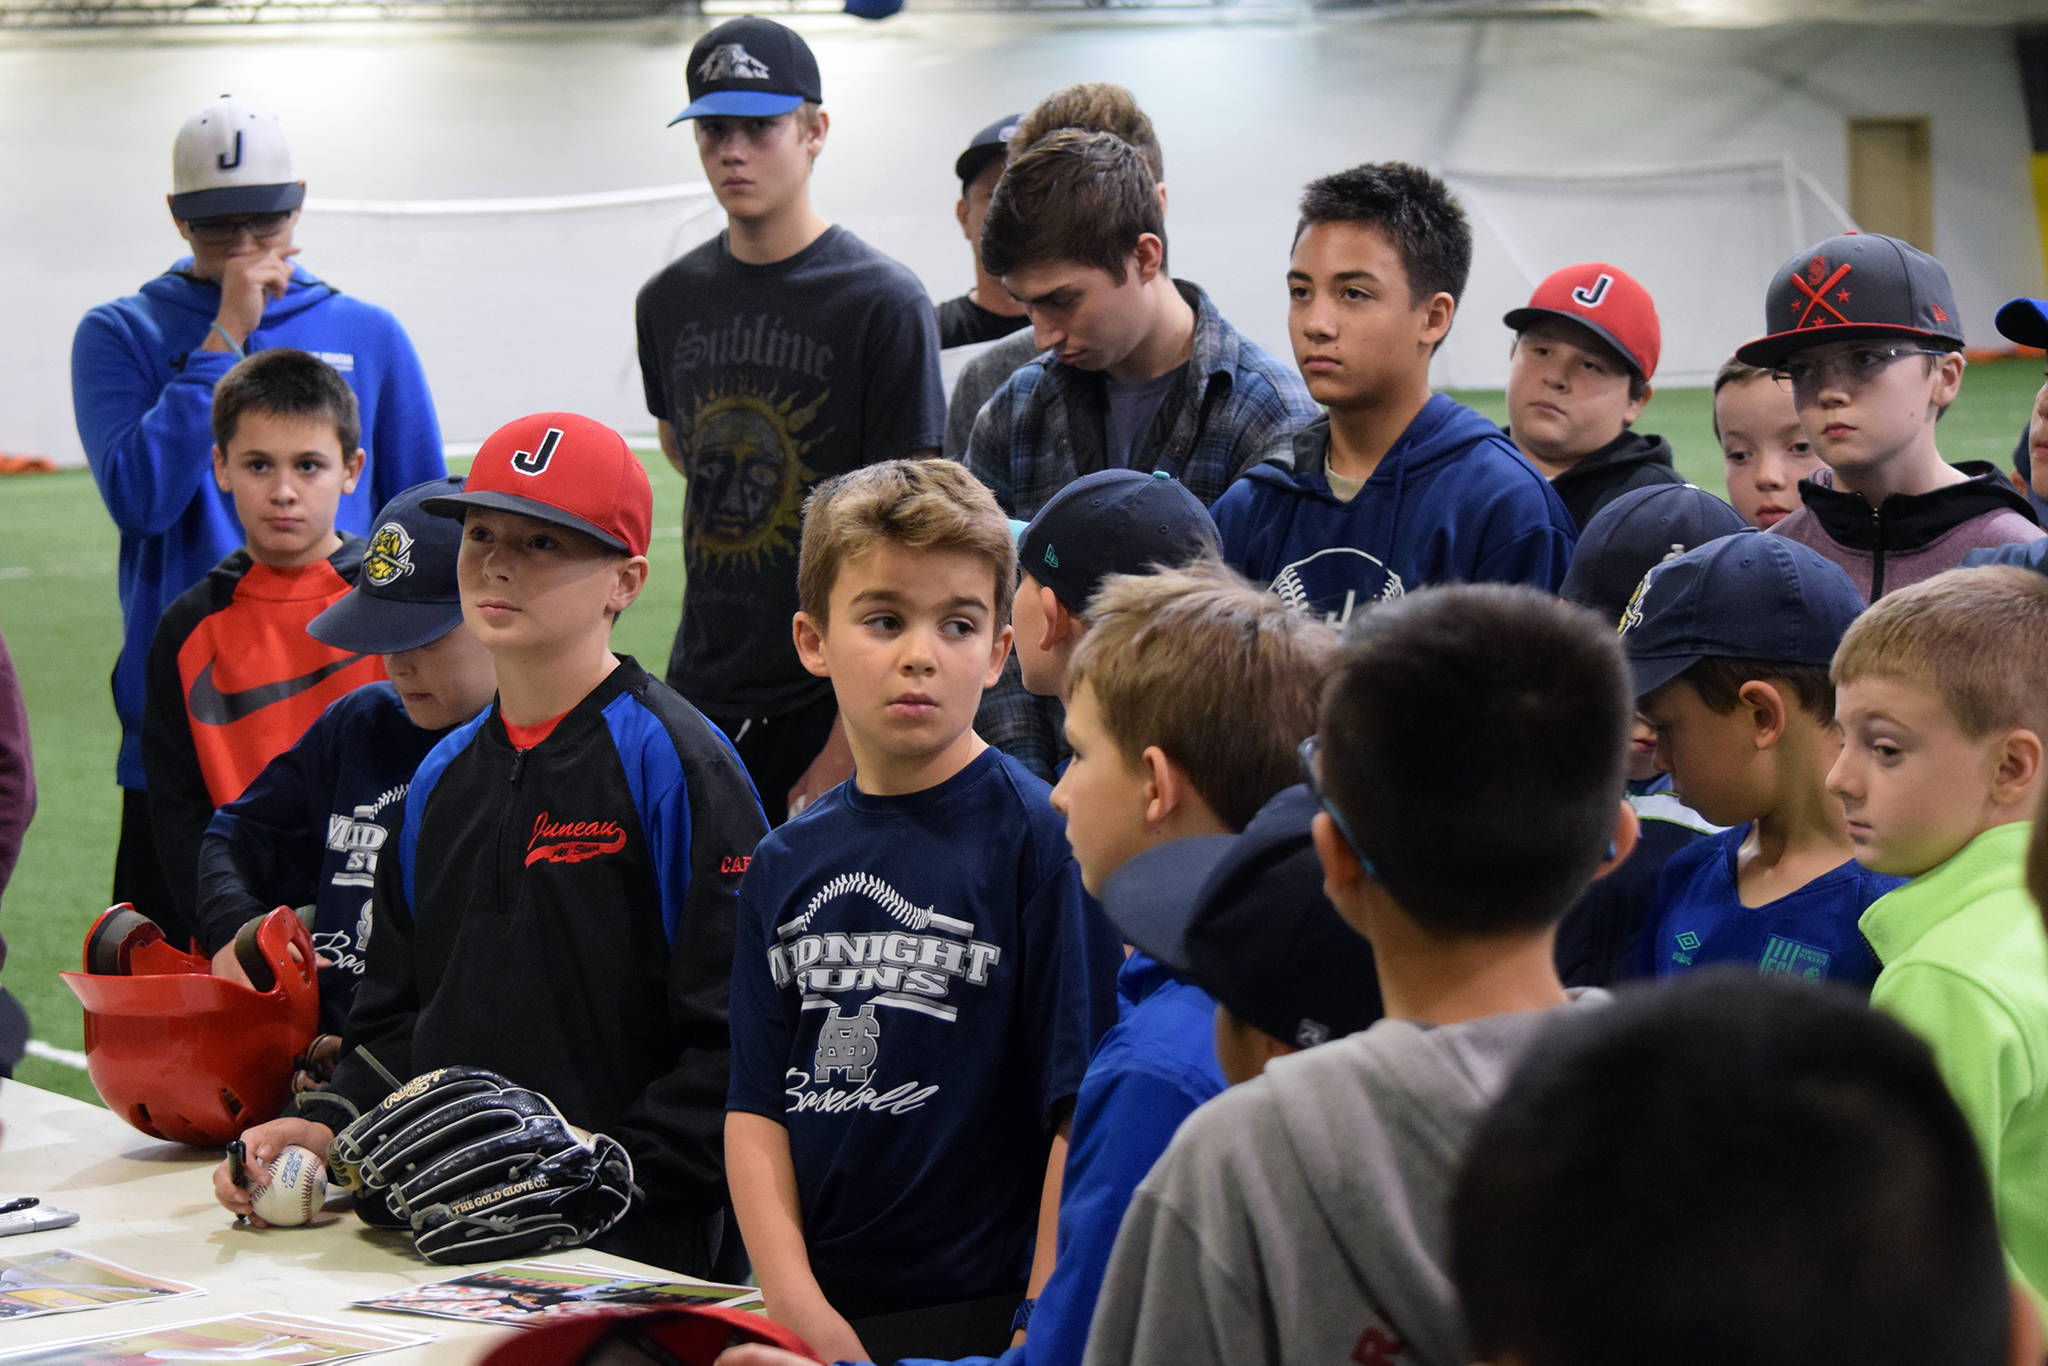 Midnight Suns Baseball Club baseball players listen to Cleveland Indians pitcher Zach Plesac at the Wells Fargo Dimond Park Field House on Thursday, Oct. 17, 2019. Approximately 70 players, parents and coaches gathered to hear Plesac’s story. (Nolin Ainsworth | Juneau Empire)